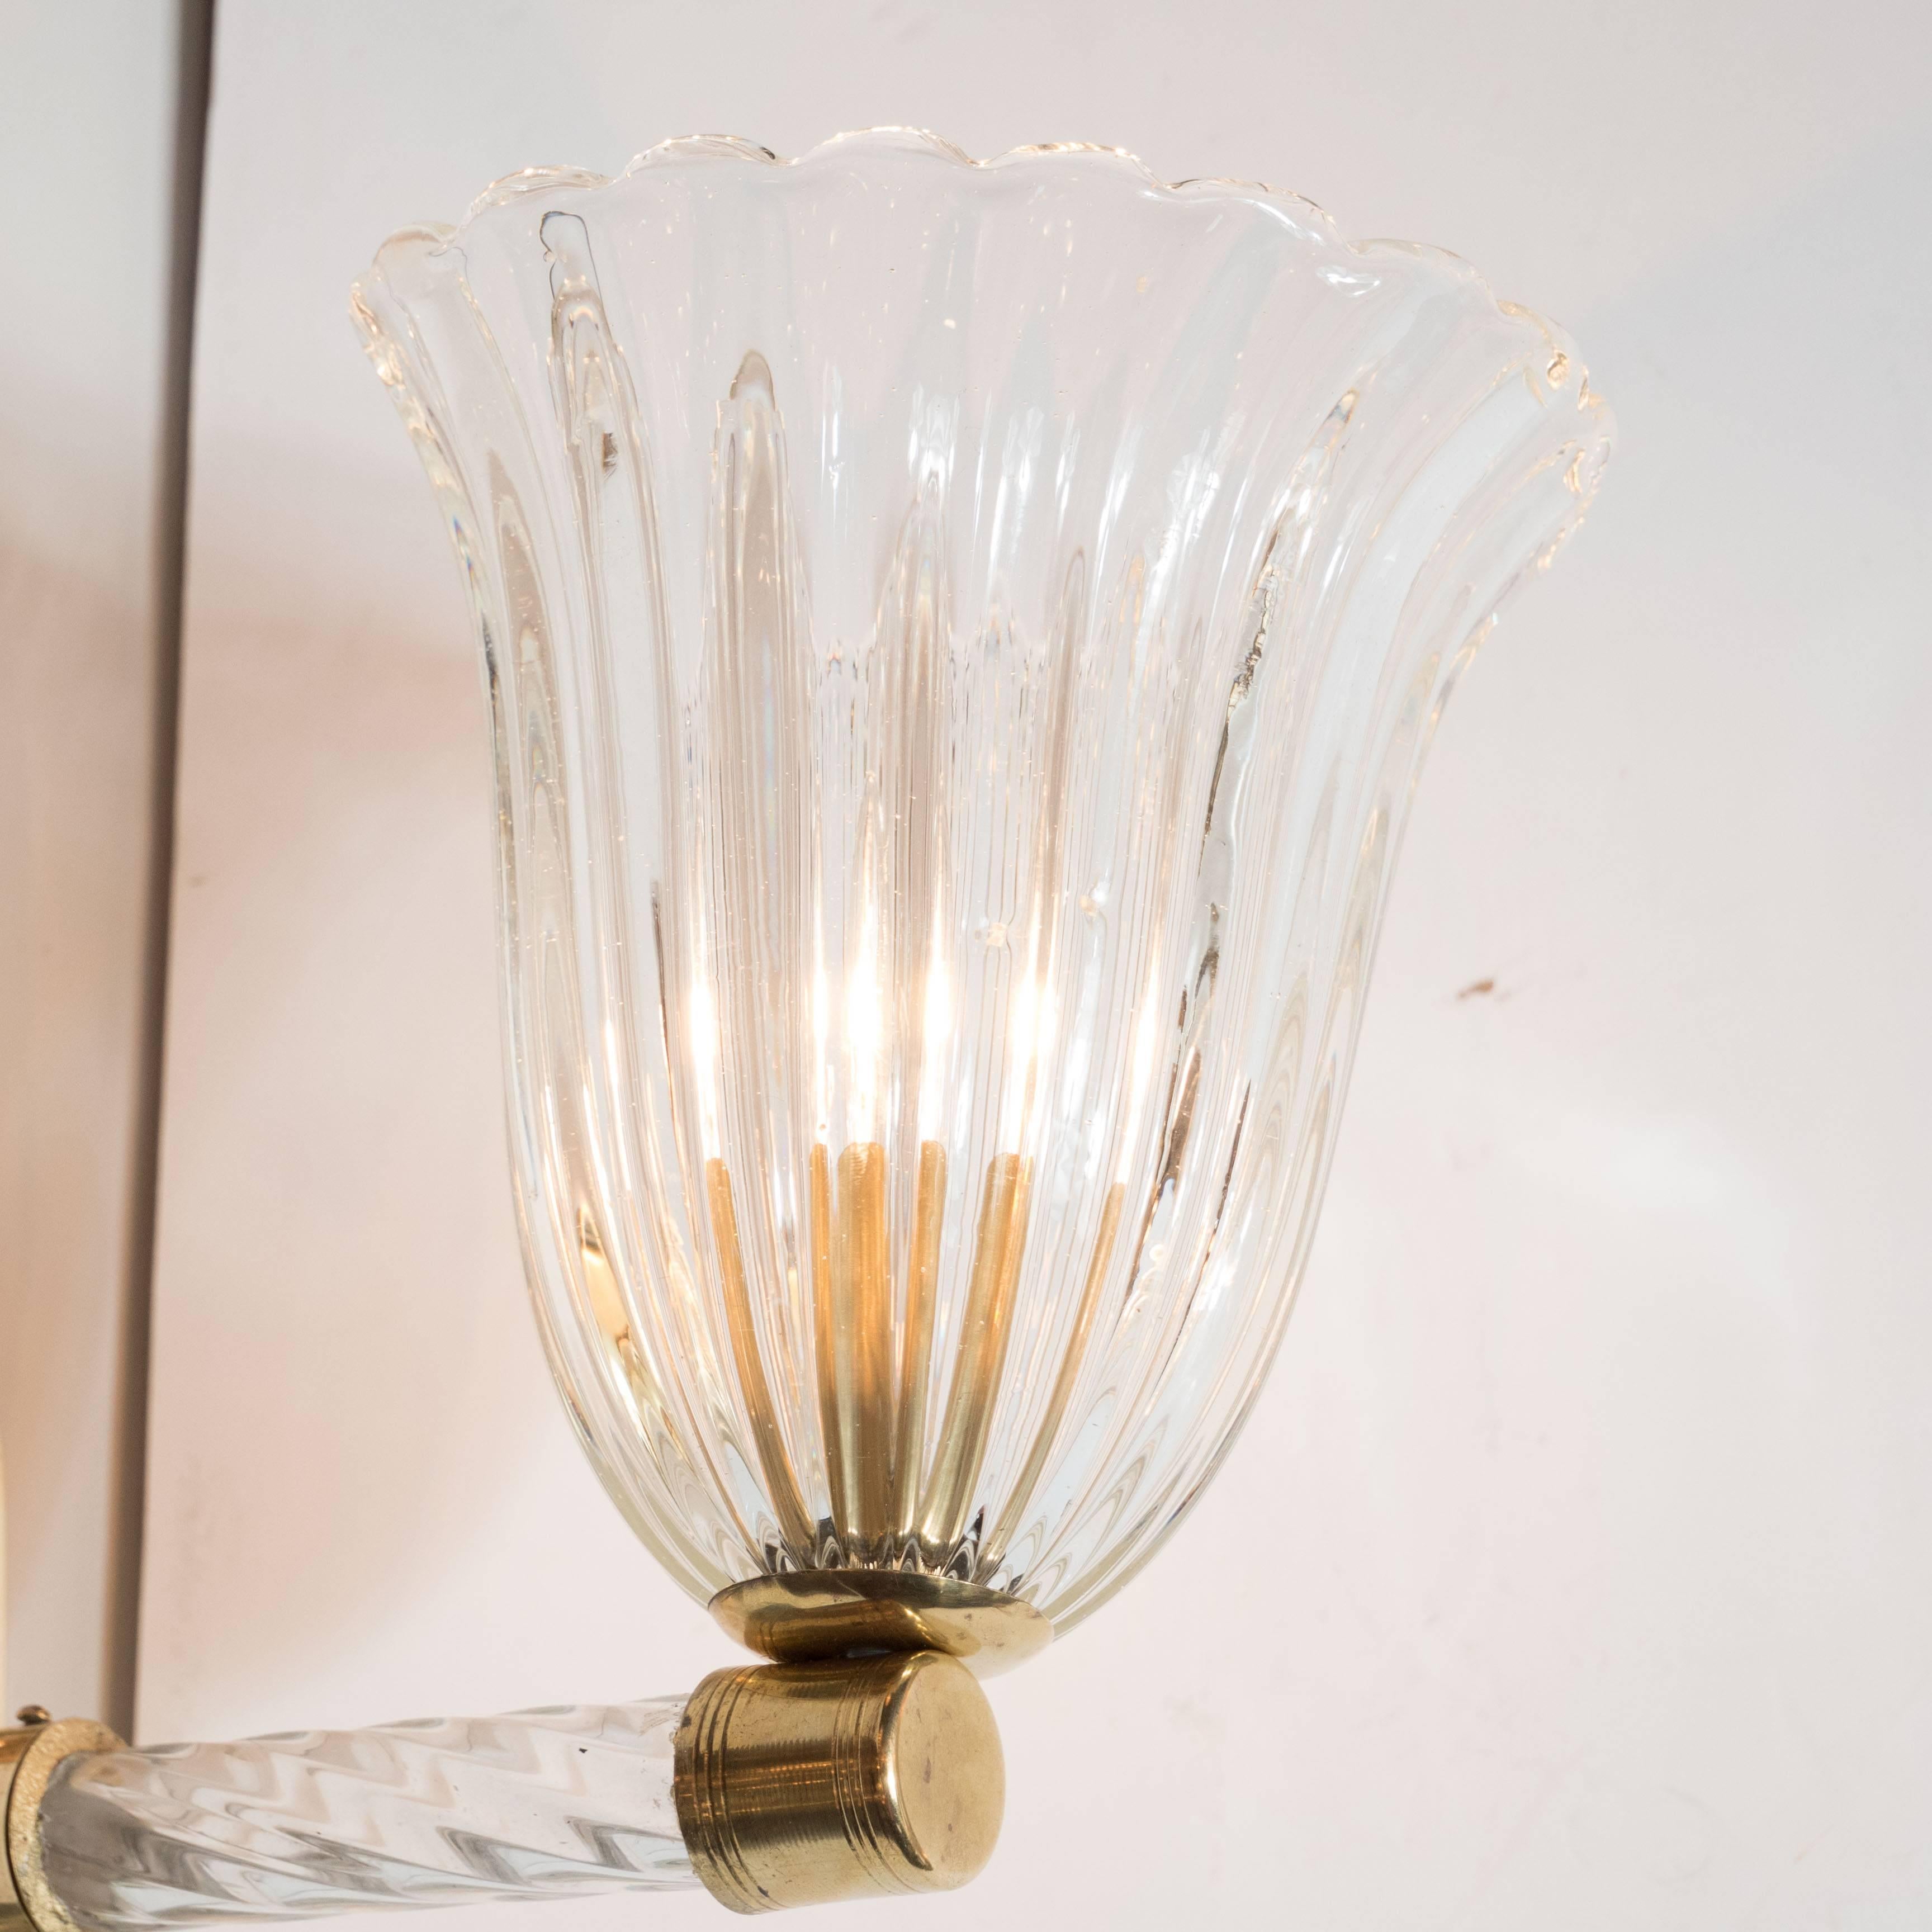 Gorgeous Pair of Mid-Century Arm Sconces in Brass and Glass by Barovier e Toso For Sale 1